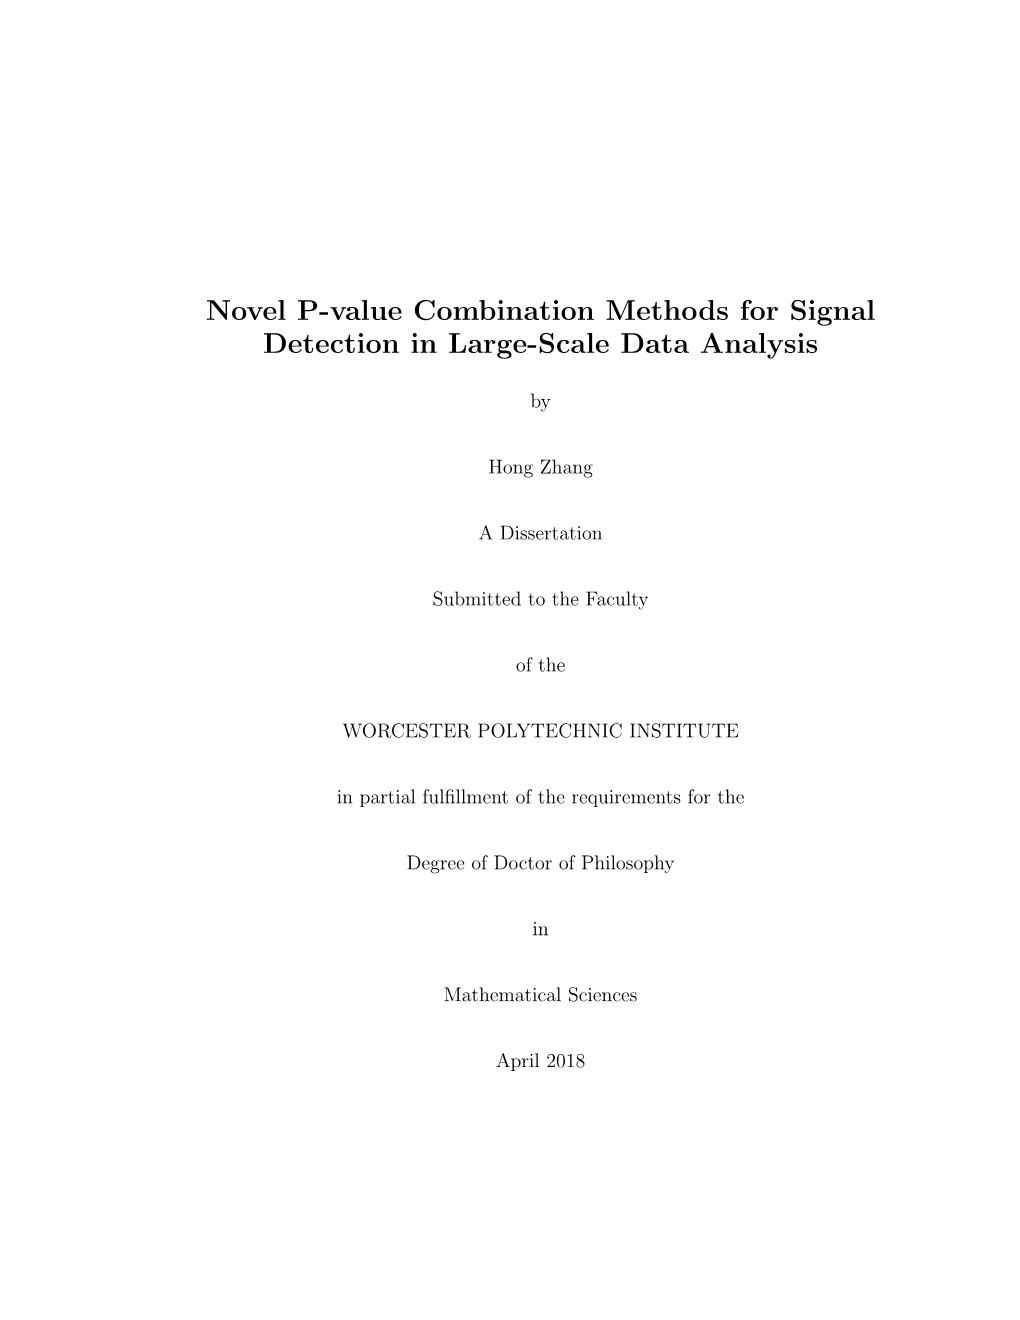 Novel P-Value Combination Methods for Signal Detection in Large-Scale Data Analysis